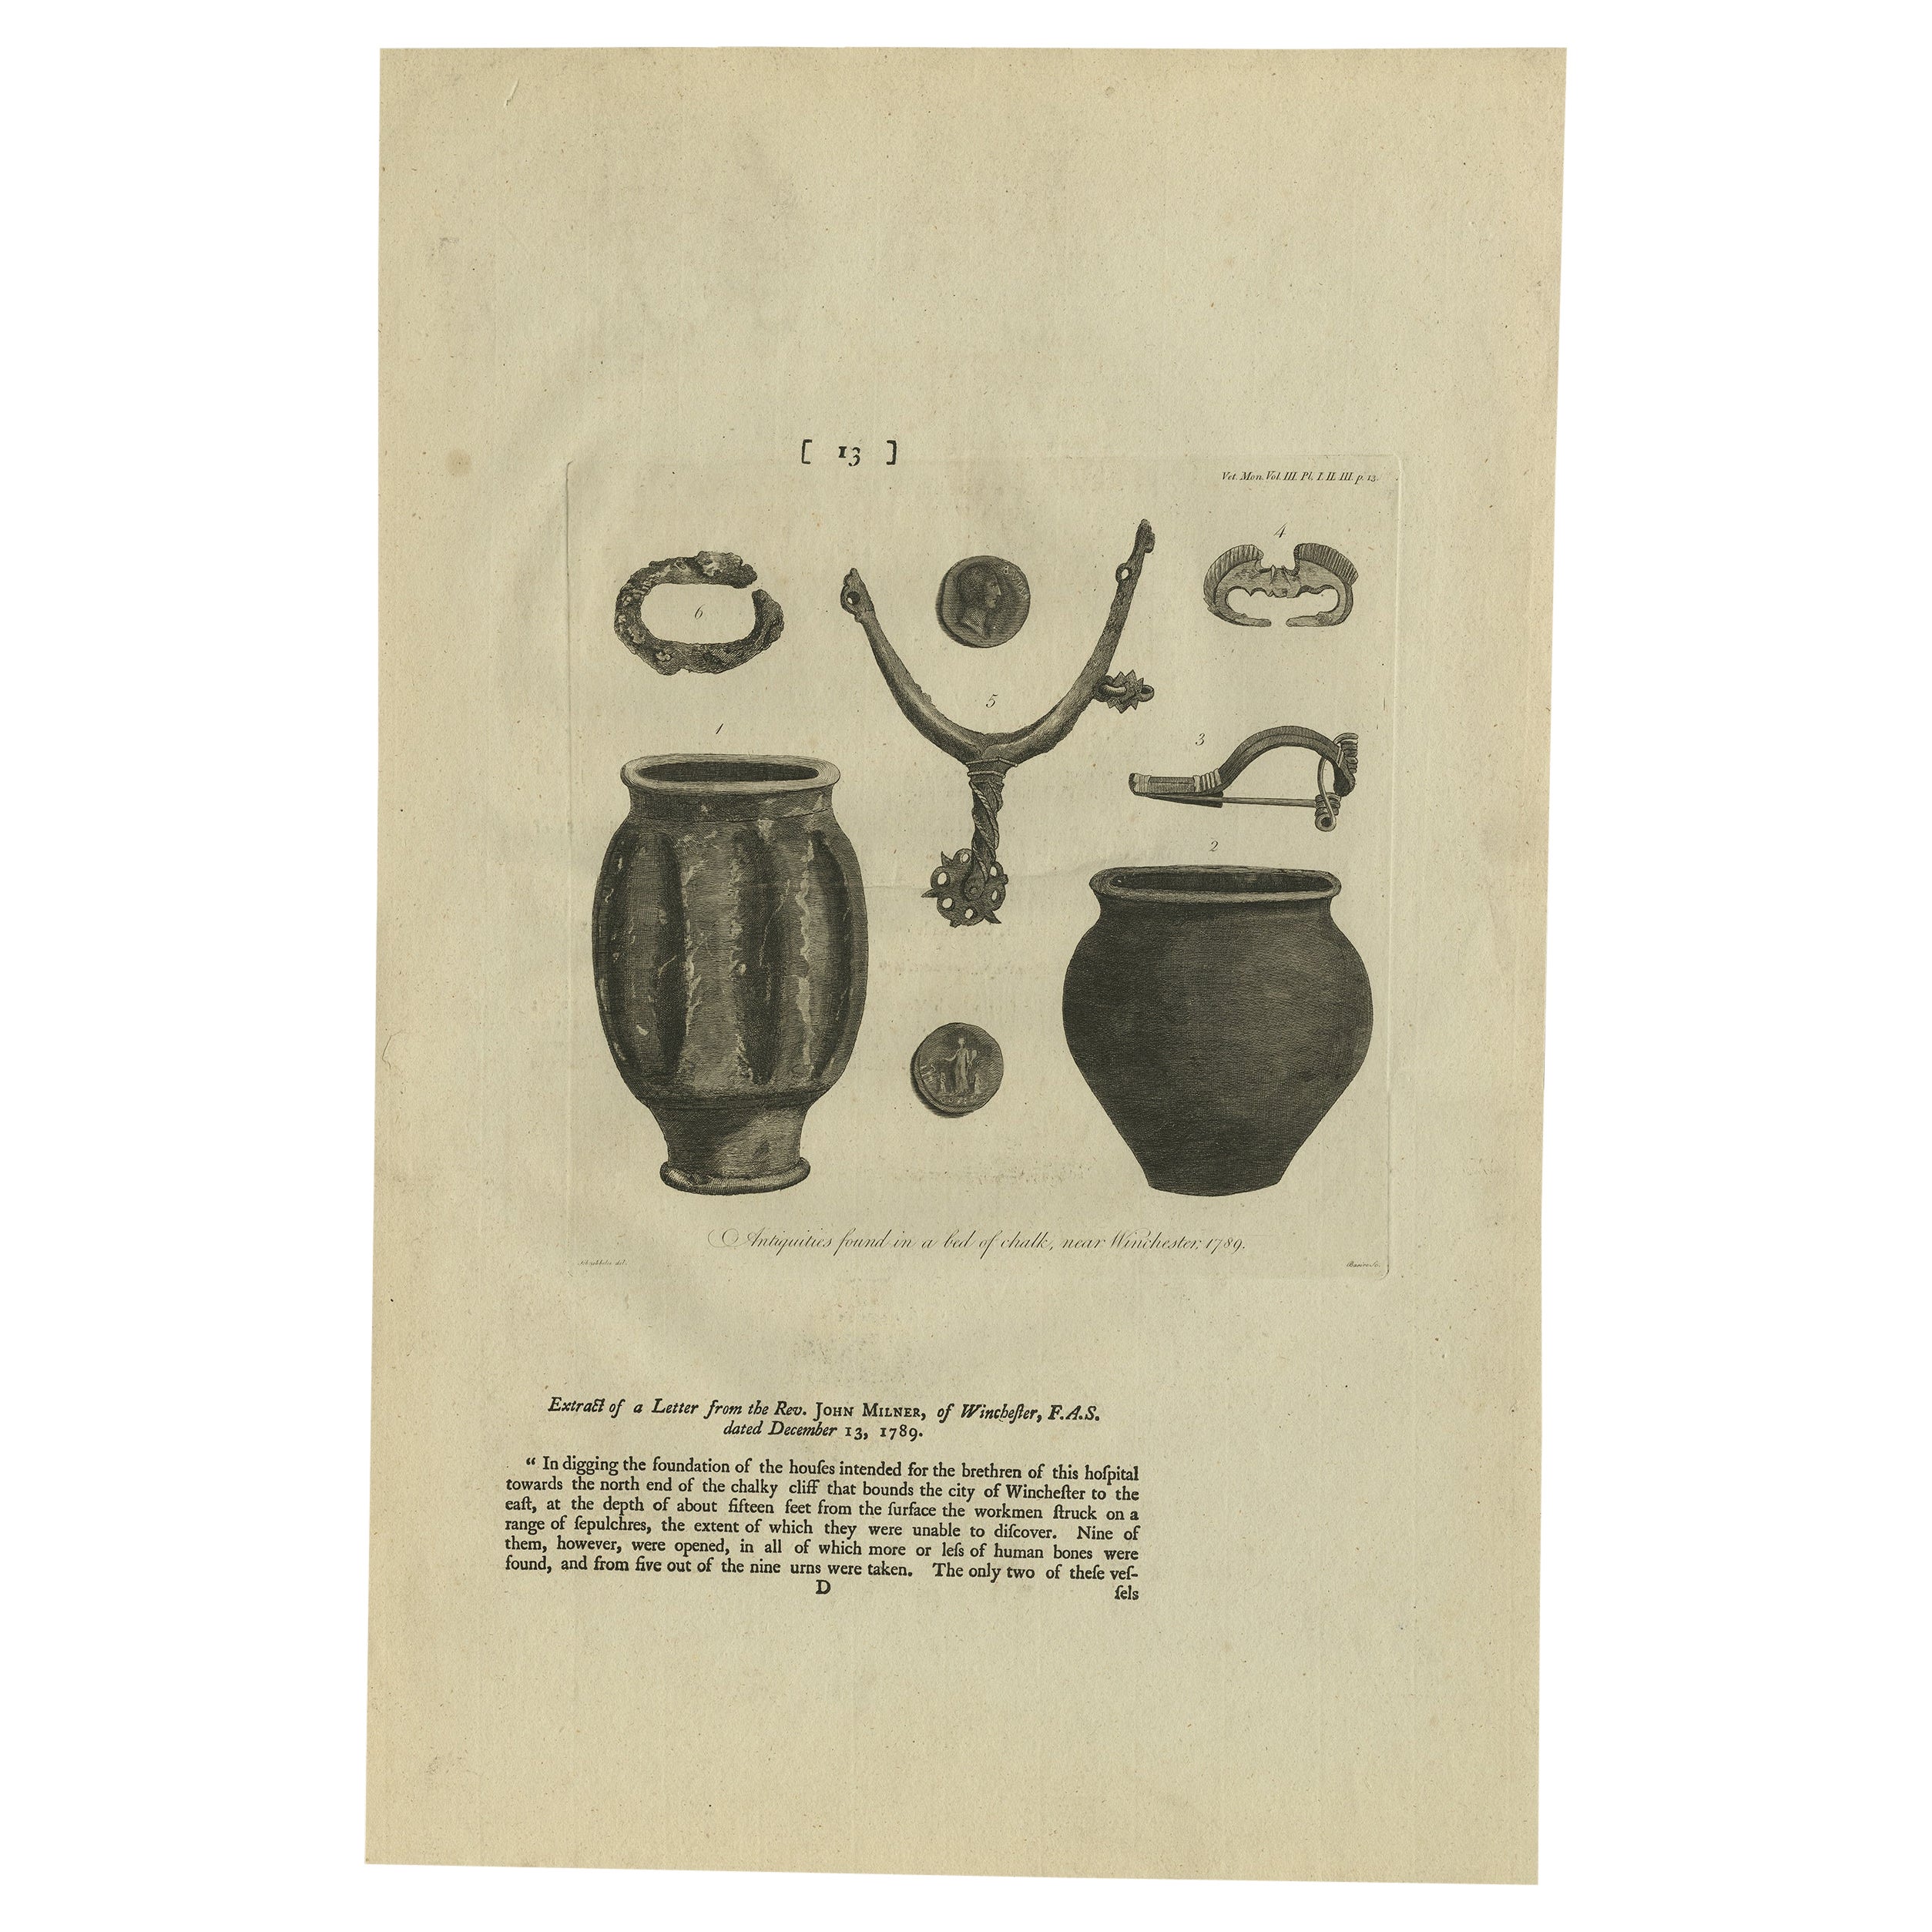 Antique print titled 'Antiquities found in a bed of chalk, near Winchester, 1789'. Antique print depicting antiquities found near Winchester. Artists and Engravers: Made by J. Basire after Schnebbelie.

Artist: Made by J. Basire after